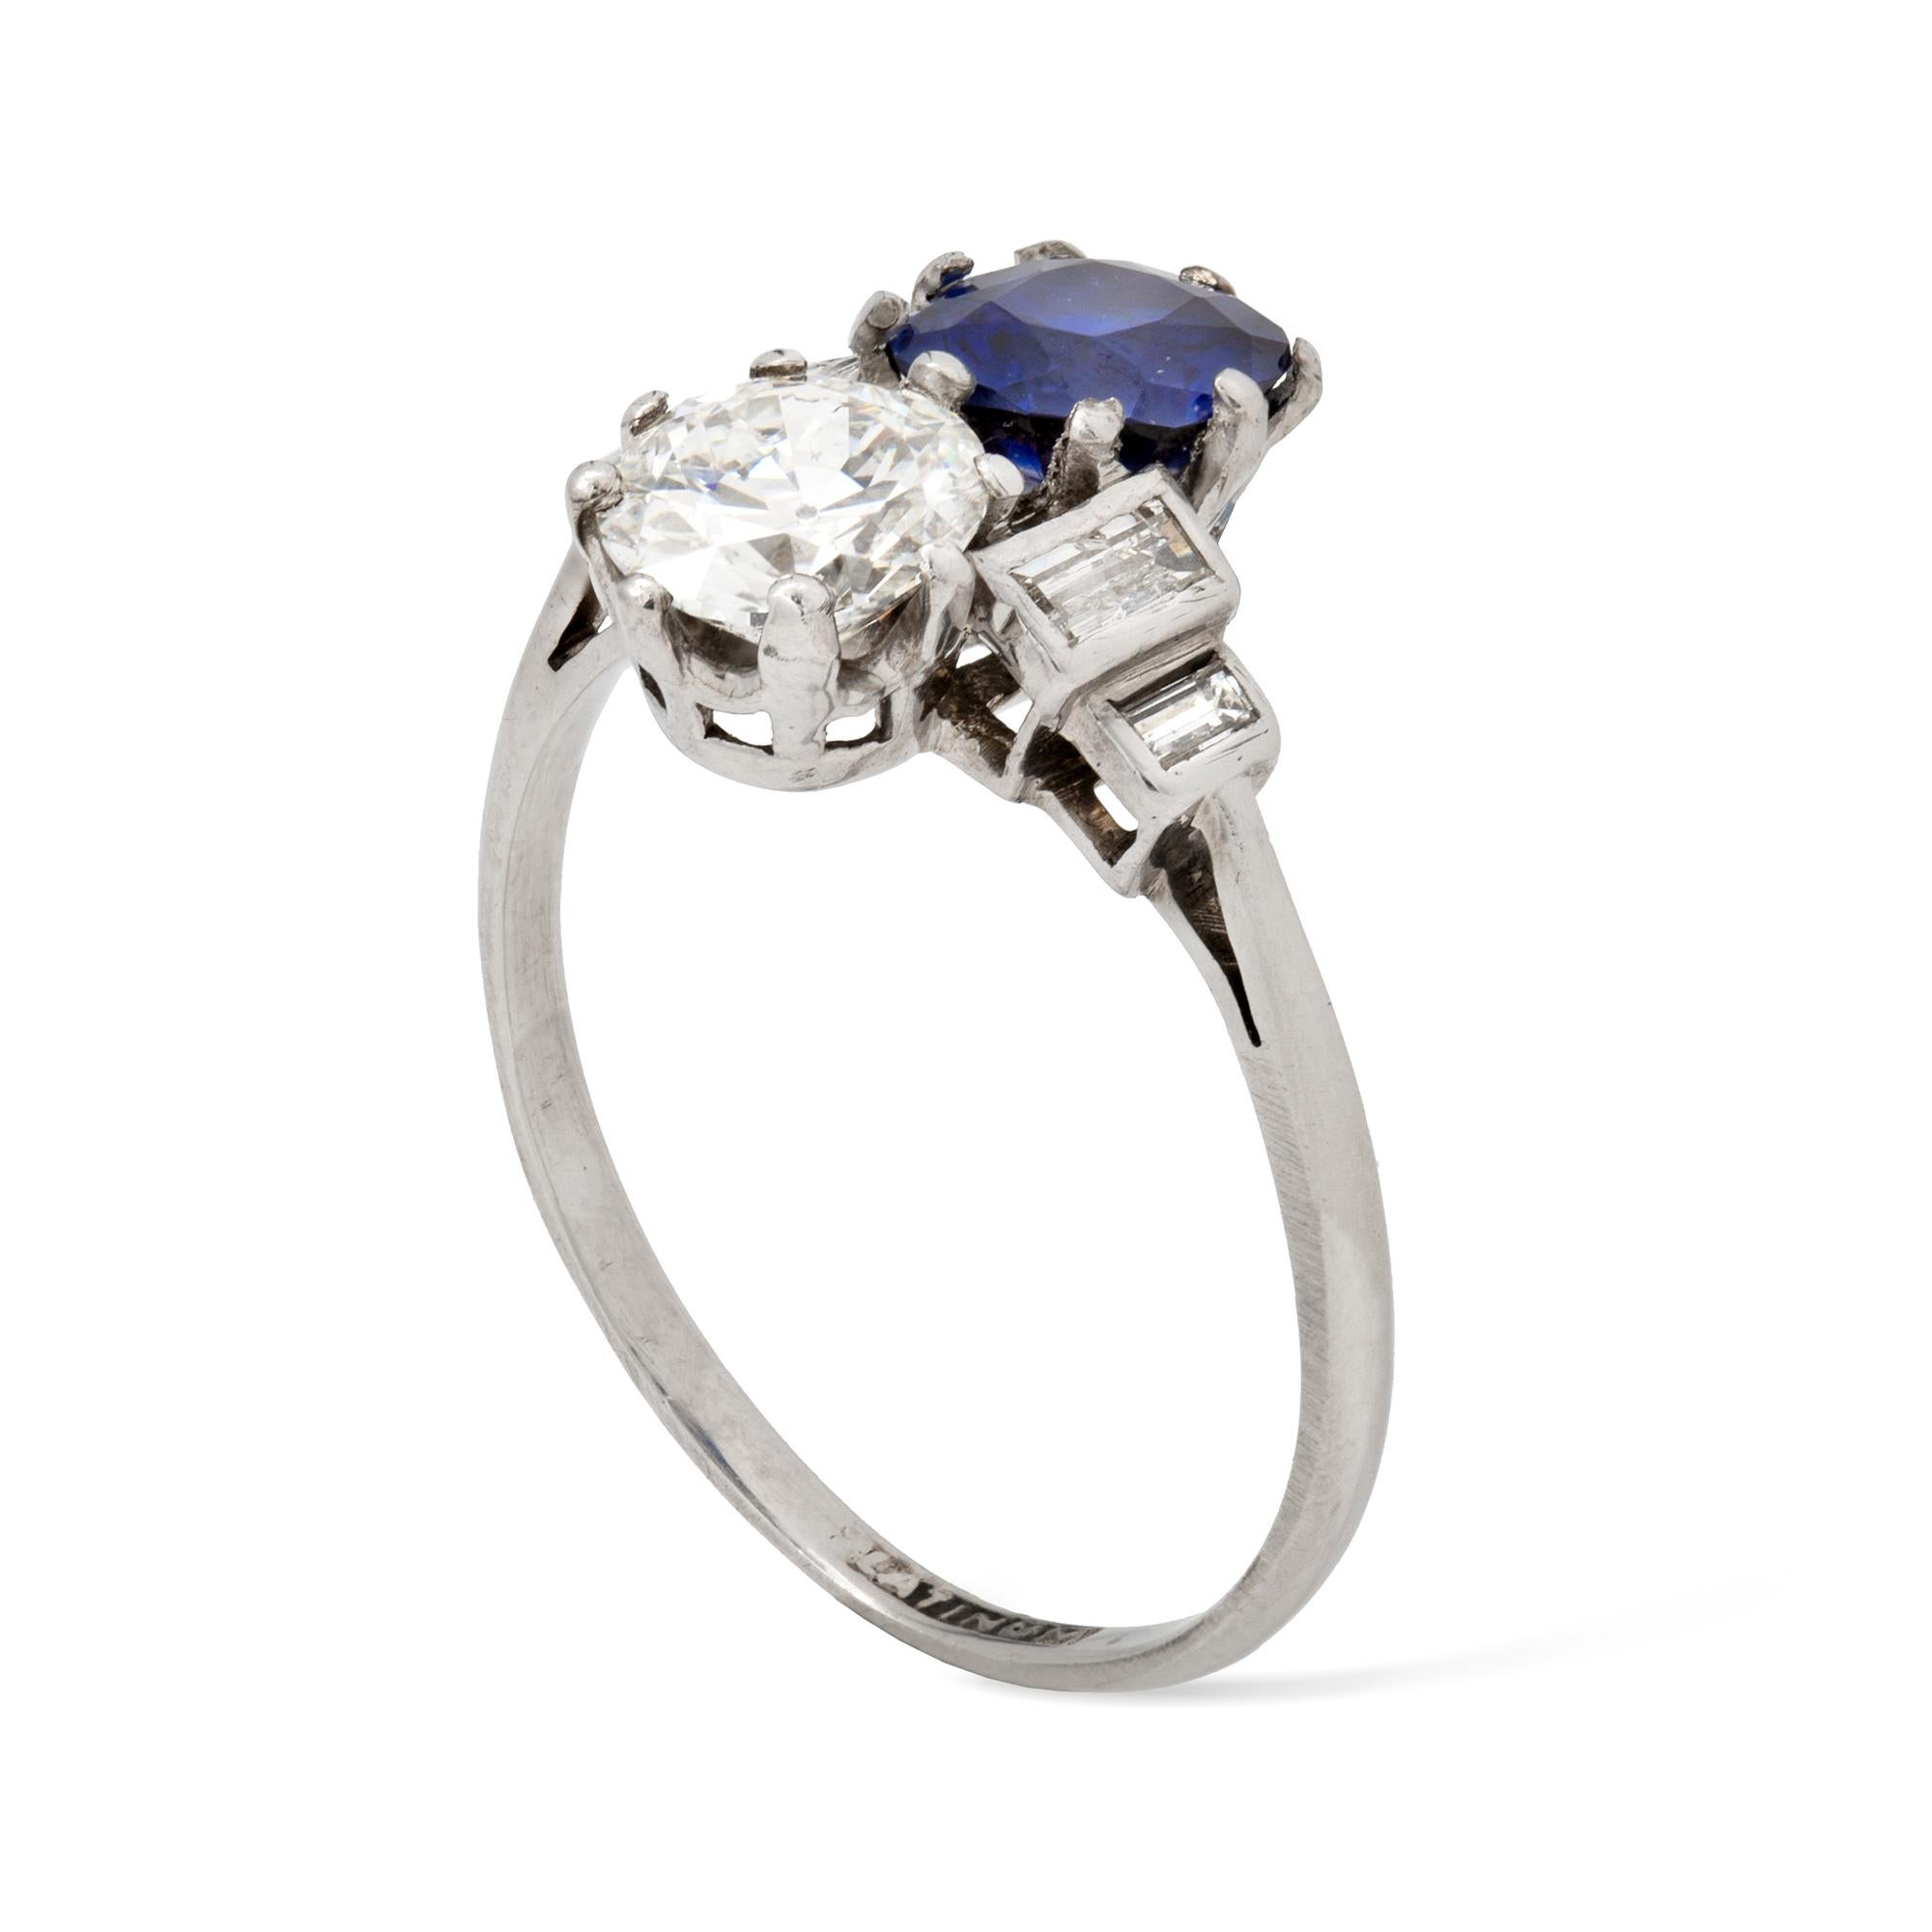 An Art Deco diamond and sapphire ring, the old brilliant-cut diamond weighing approximately 0.8 carats and the cushion-cut sapphire estimated to weigh 0.9 carats, claw-set vertically to a platinum mount between baguette diamond-set shoulders,  circa